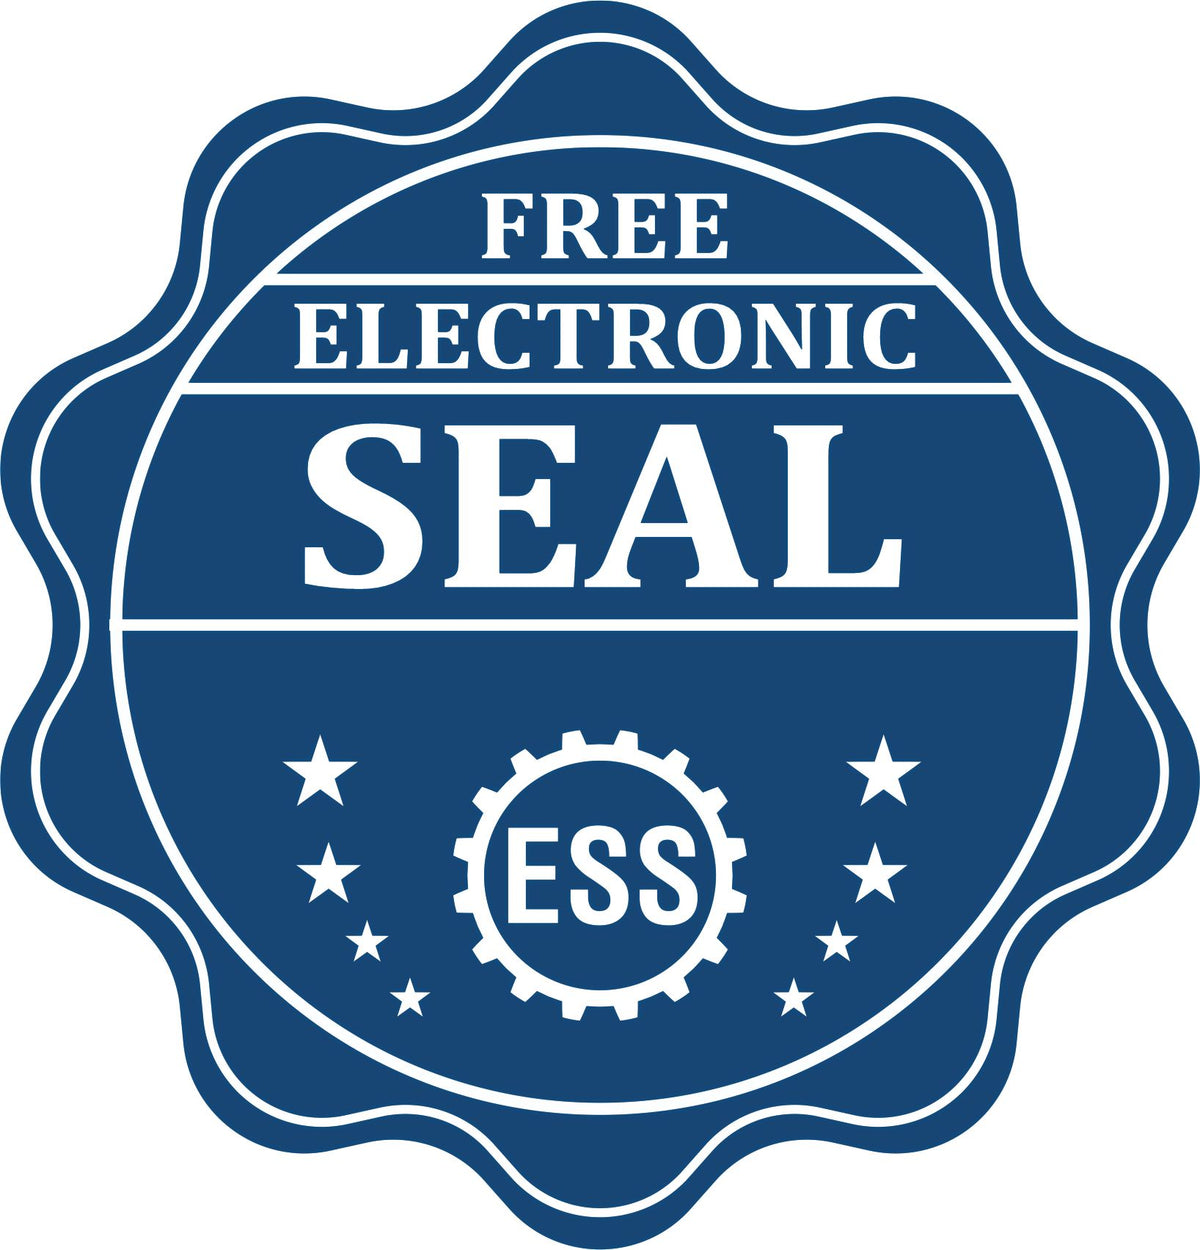 A badge showing a free electronic seal for the Handheld Nebraska Land Surveyor Seal with stars and the ESS gear on the emblem.